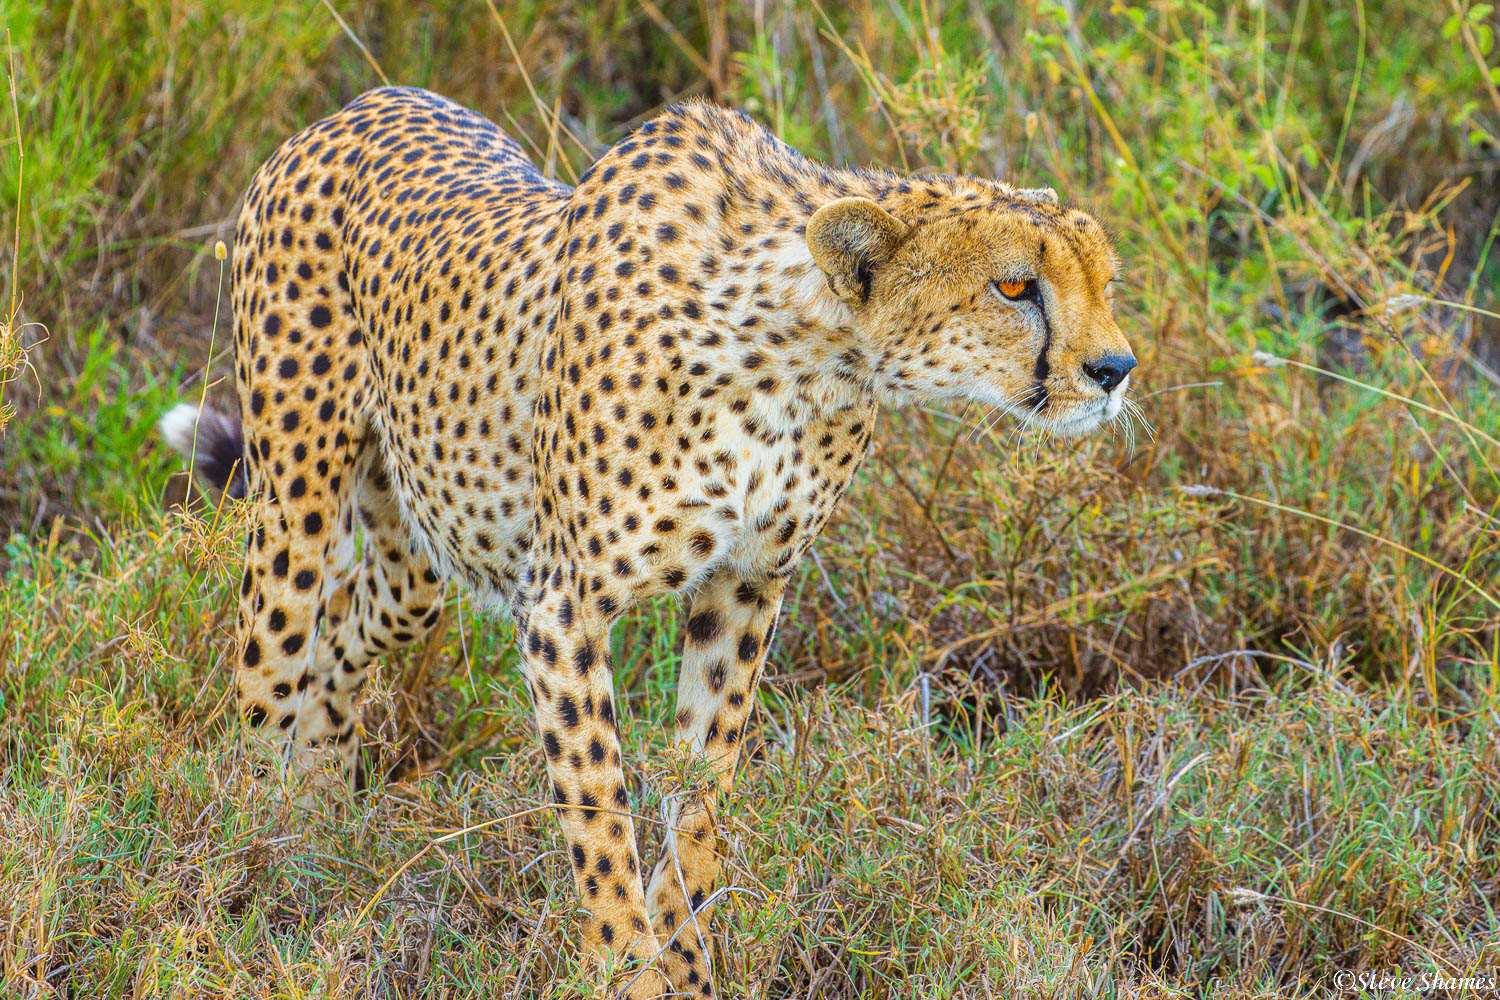 Cheetah in a stalking stance. Danger and prey, thats what they are constantly looking for.